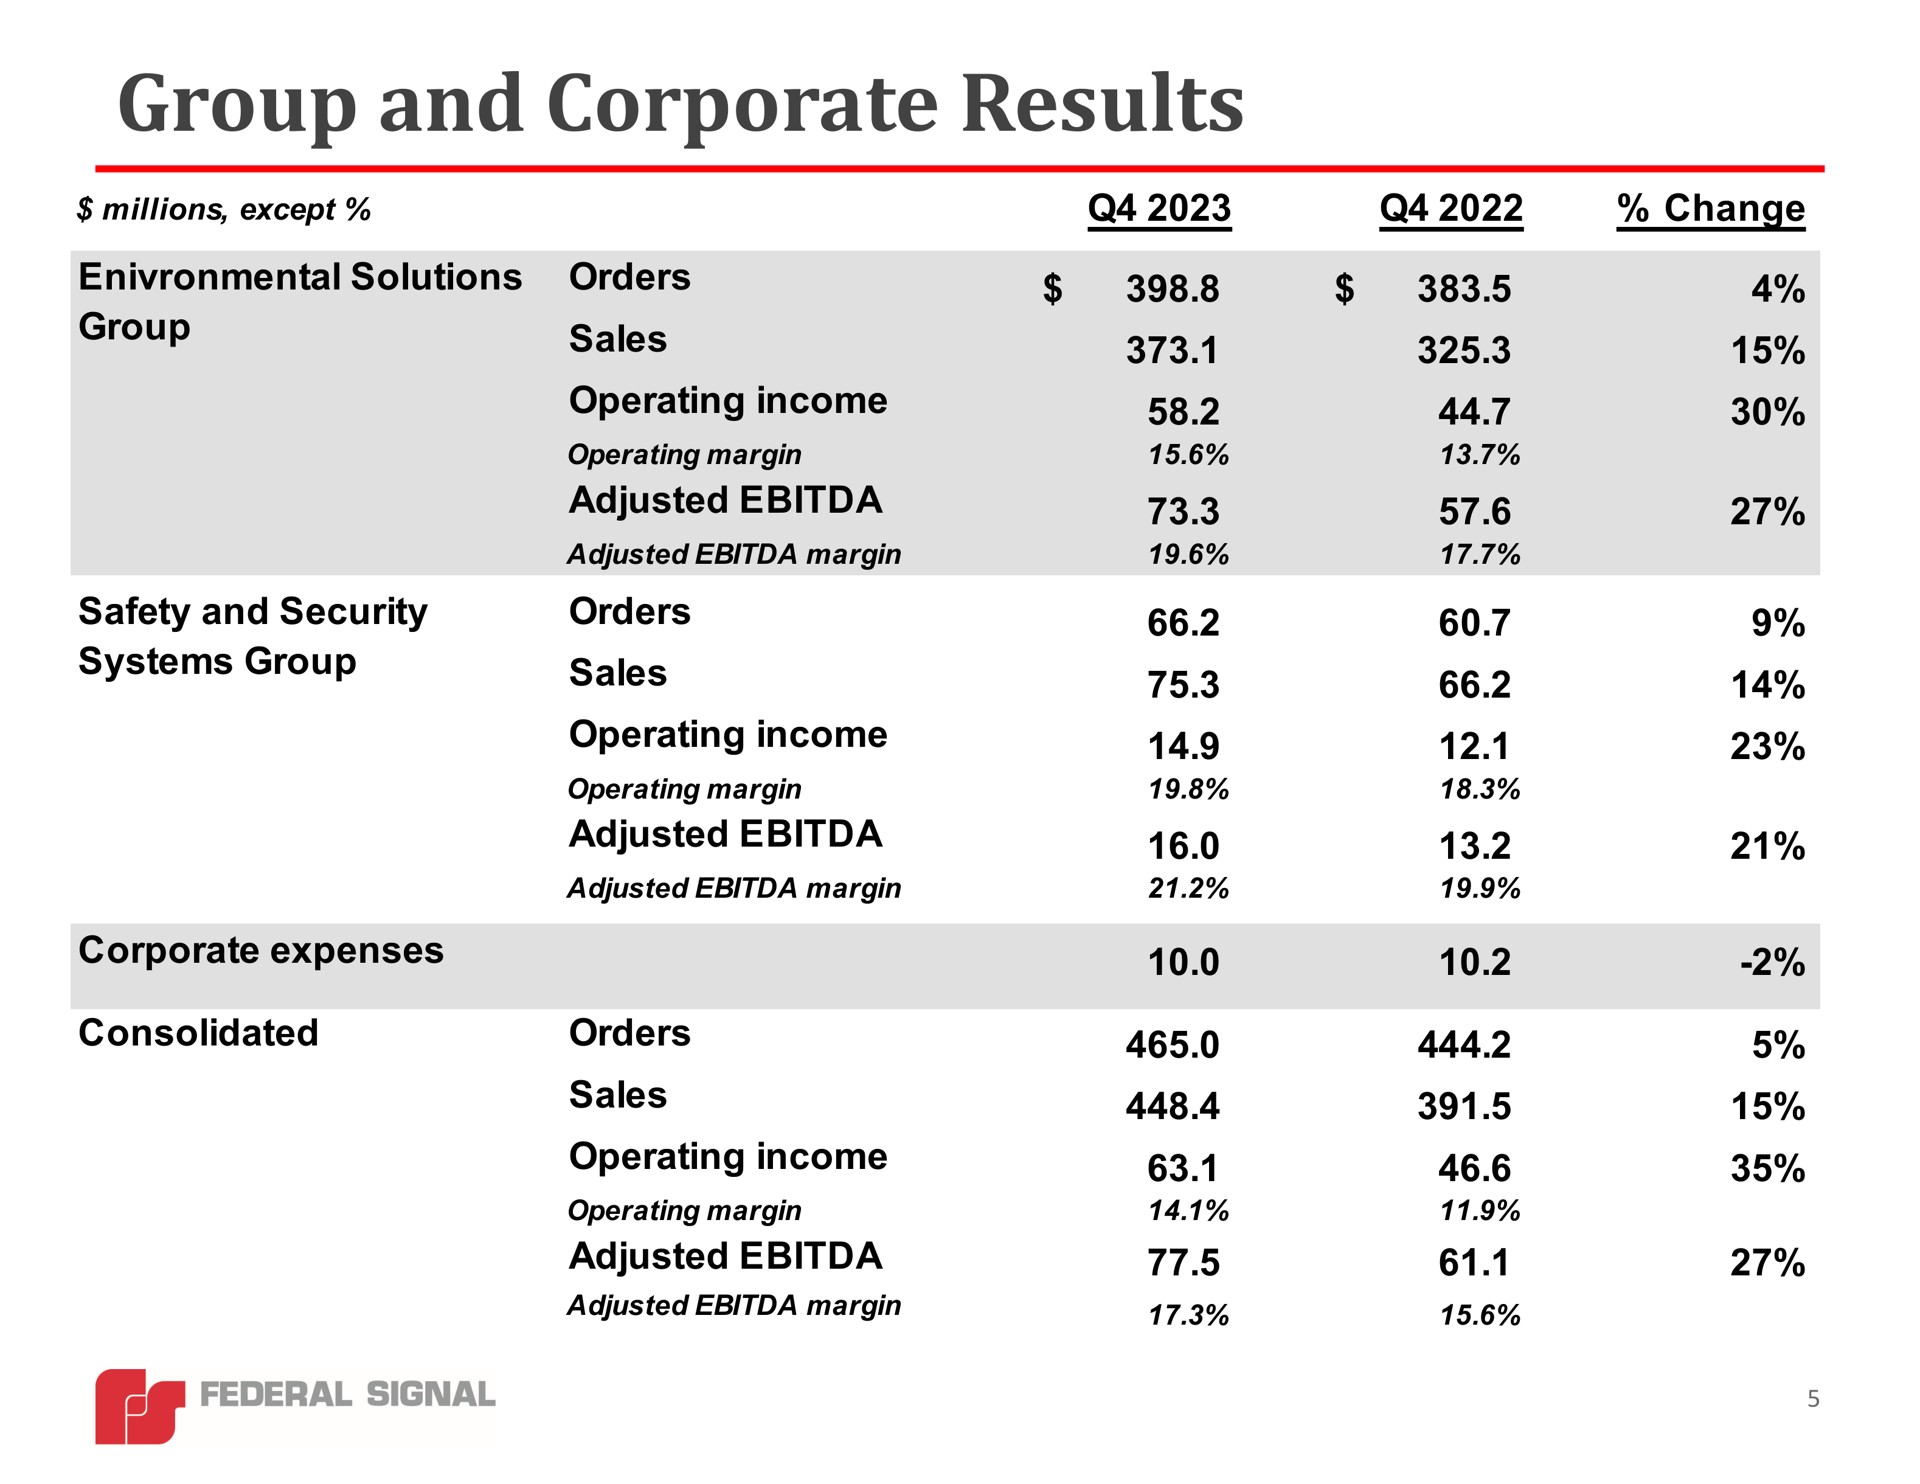 group and corporate results change | Federal Signal